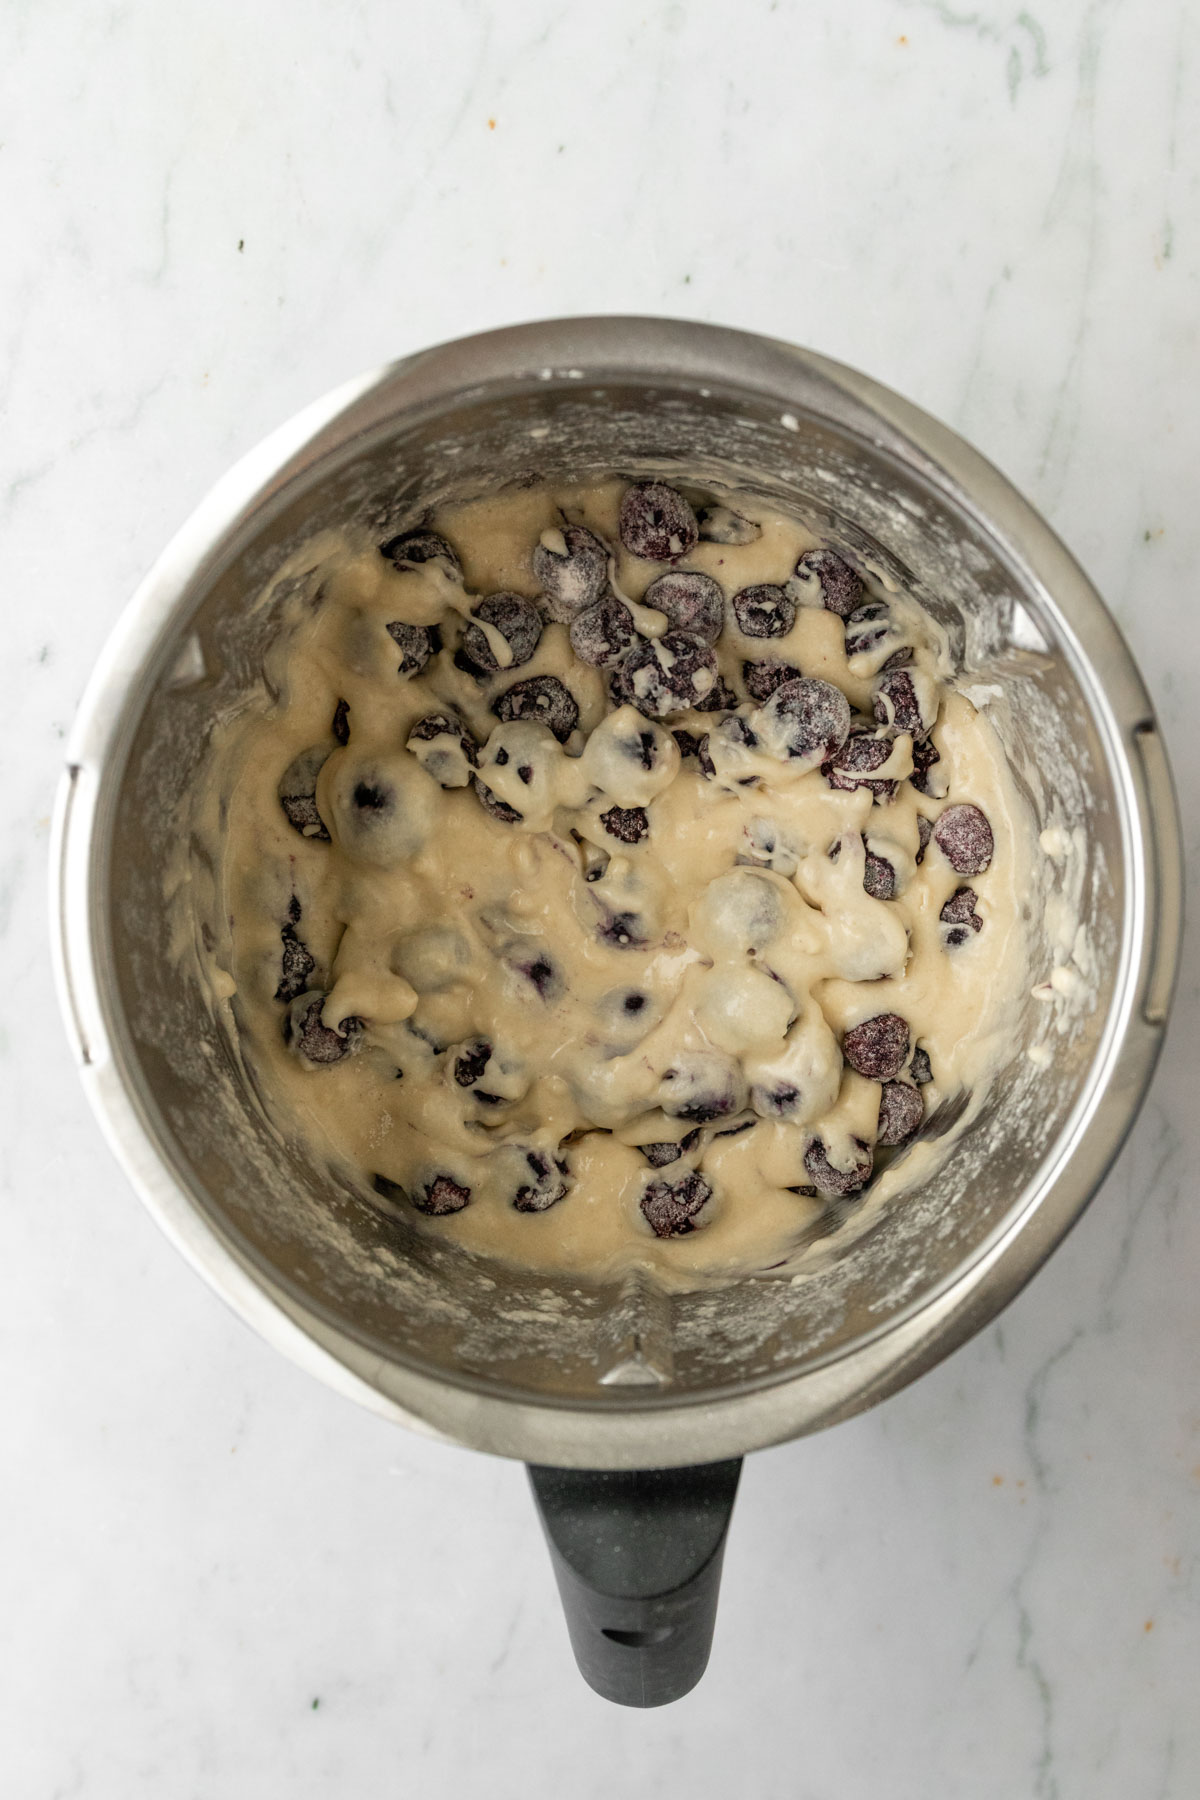 a Thermomix mixing bowl with muffin batter with blueberries inside